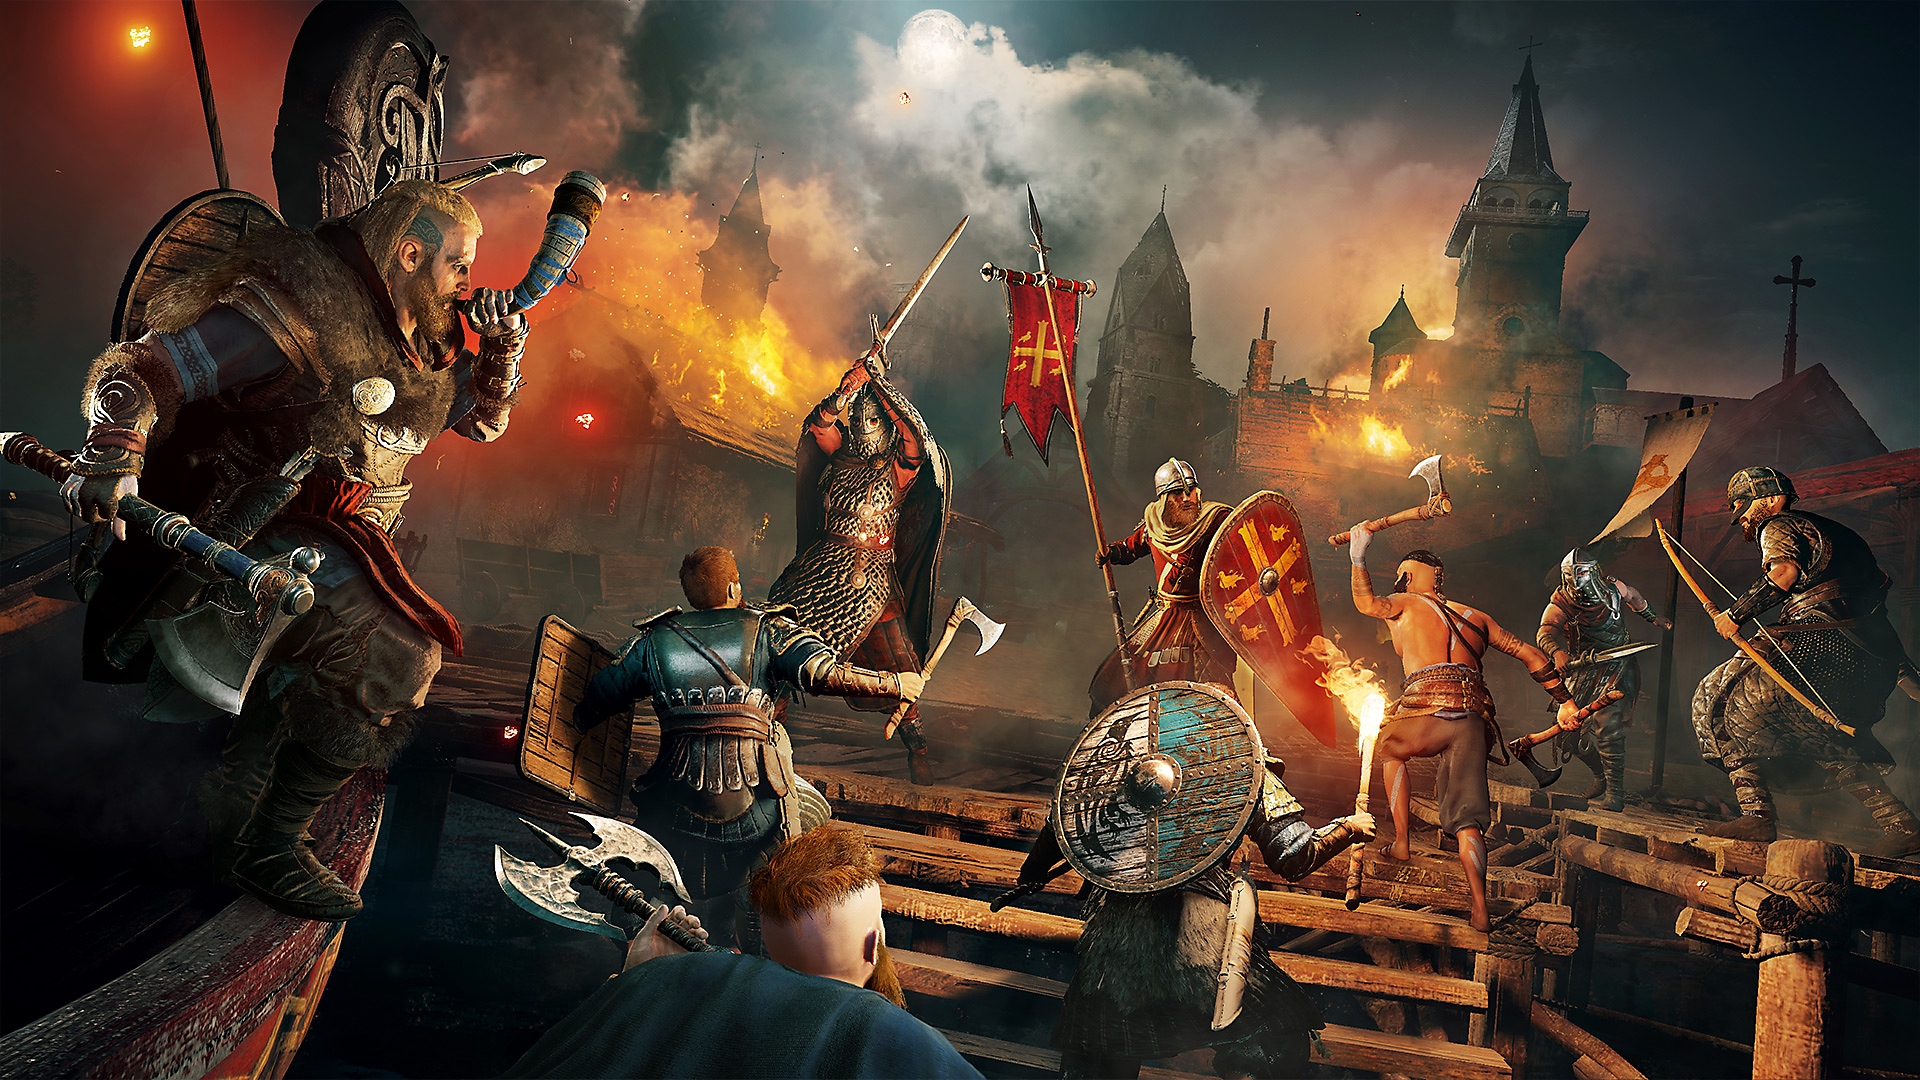 Assassin's Creed Valhalla screenshot showing many non-playable characters engaging in battle